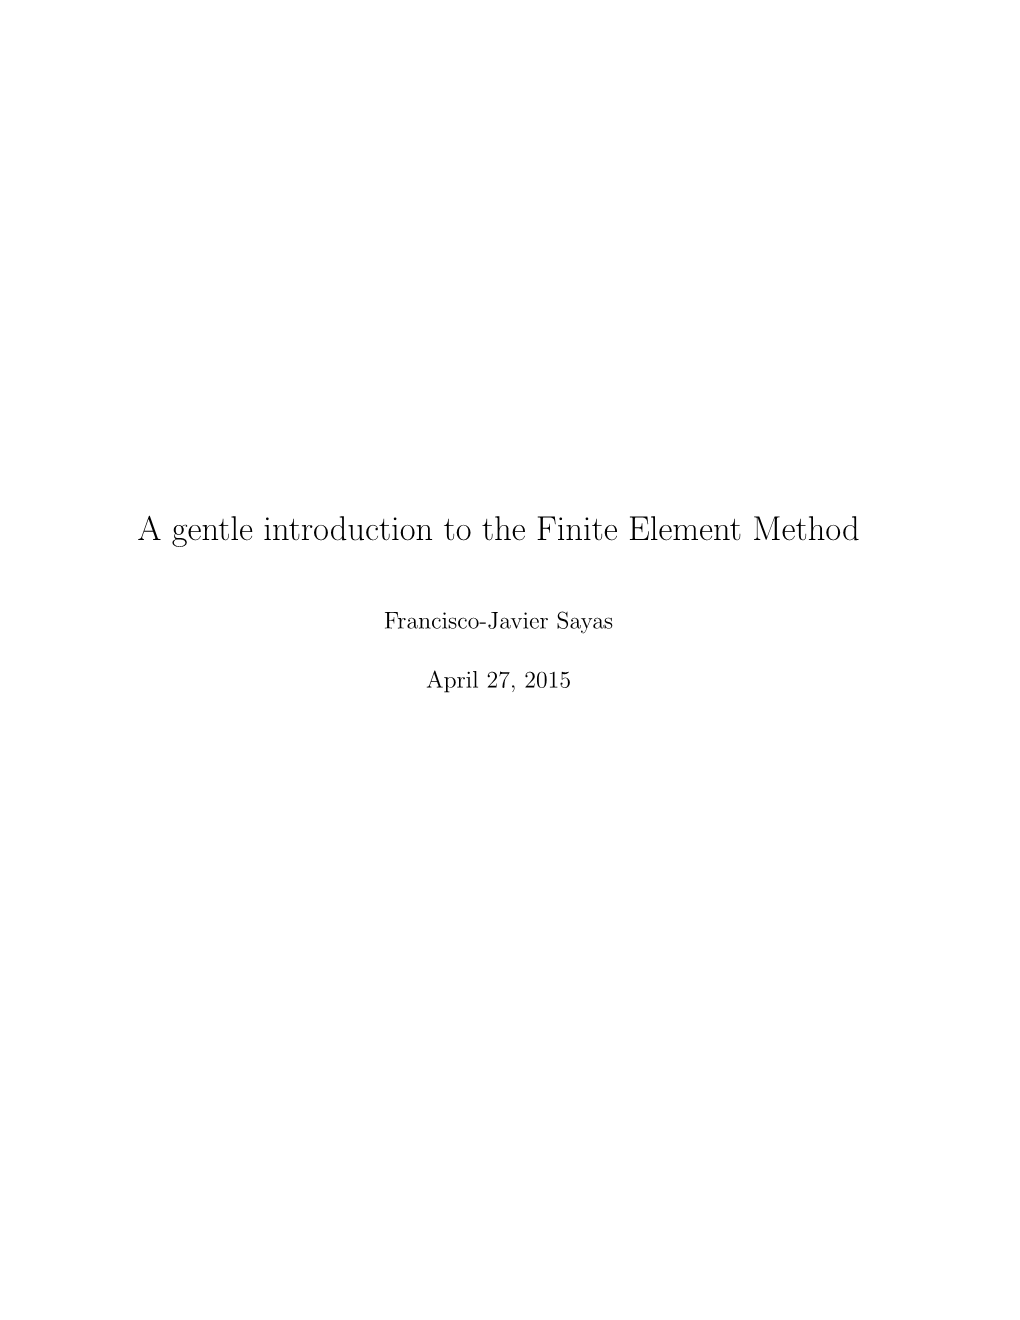 A Gentle Introduction to the Finite Element Method